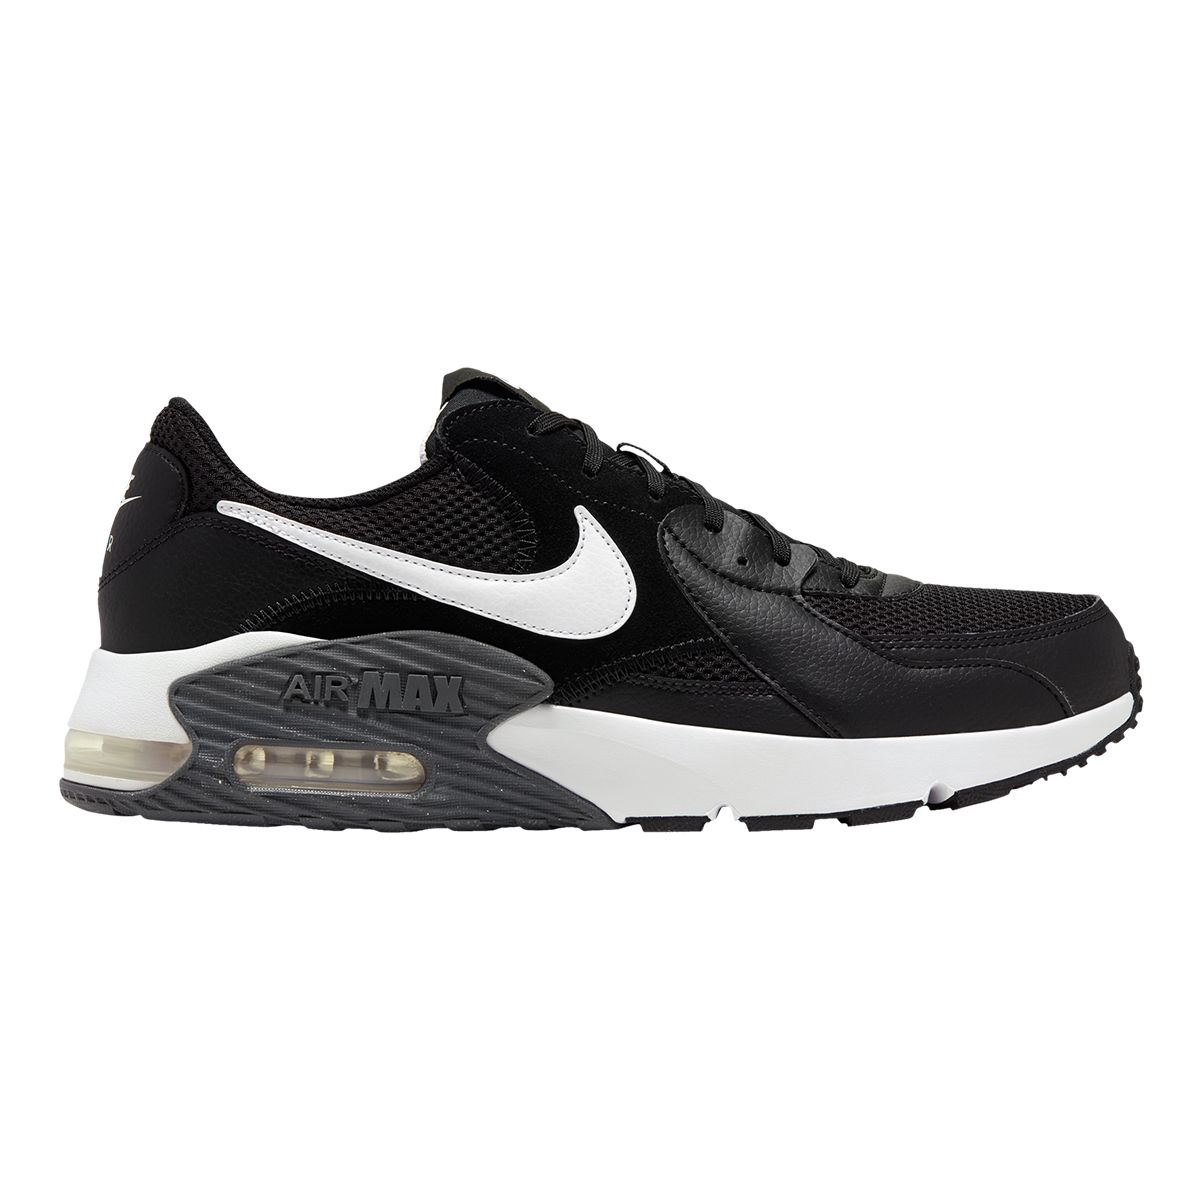 Nike Men's Air Max Excee Shoes  Sneakers Cushioned Lightweight